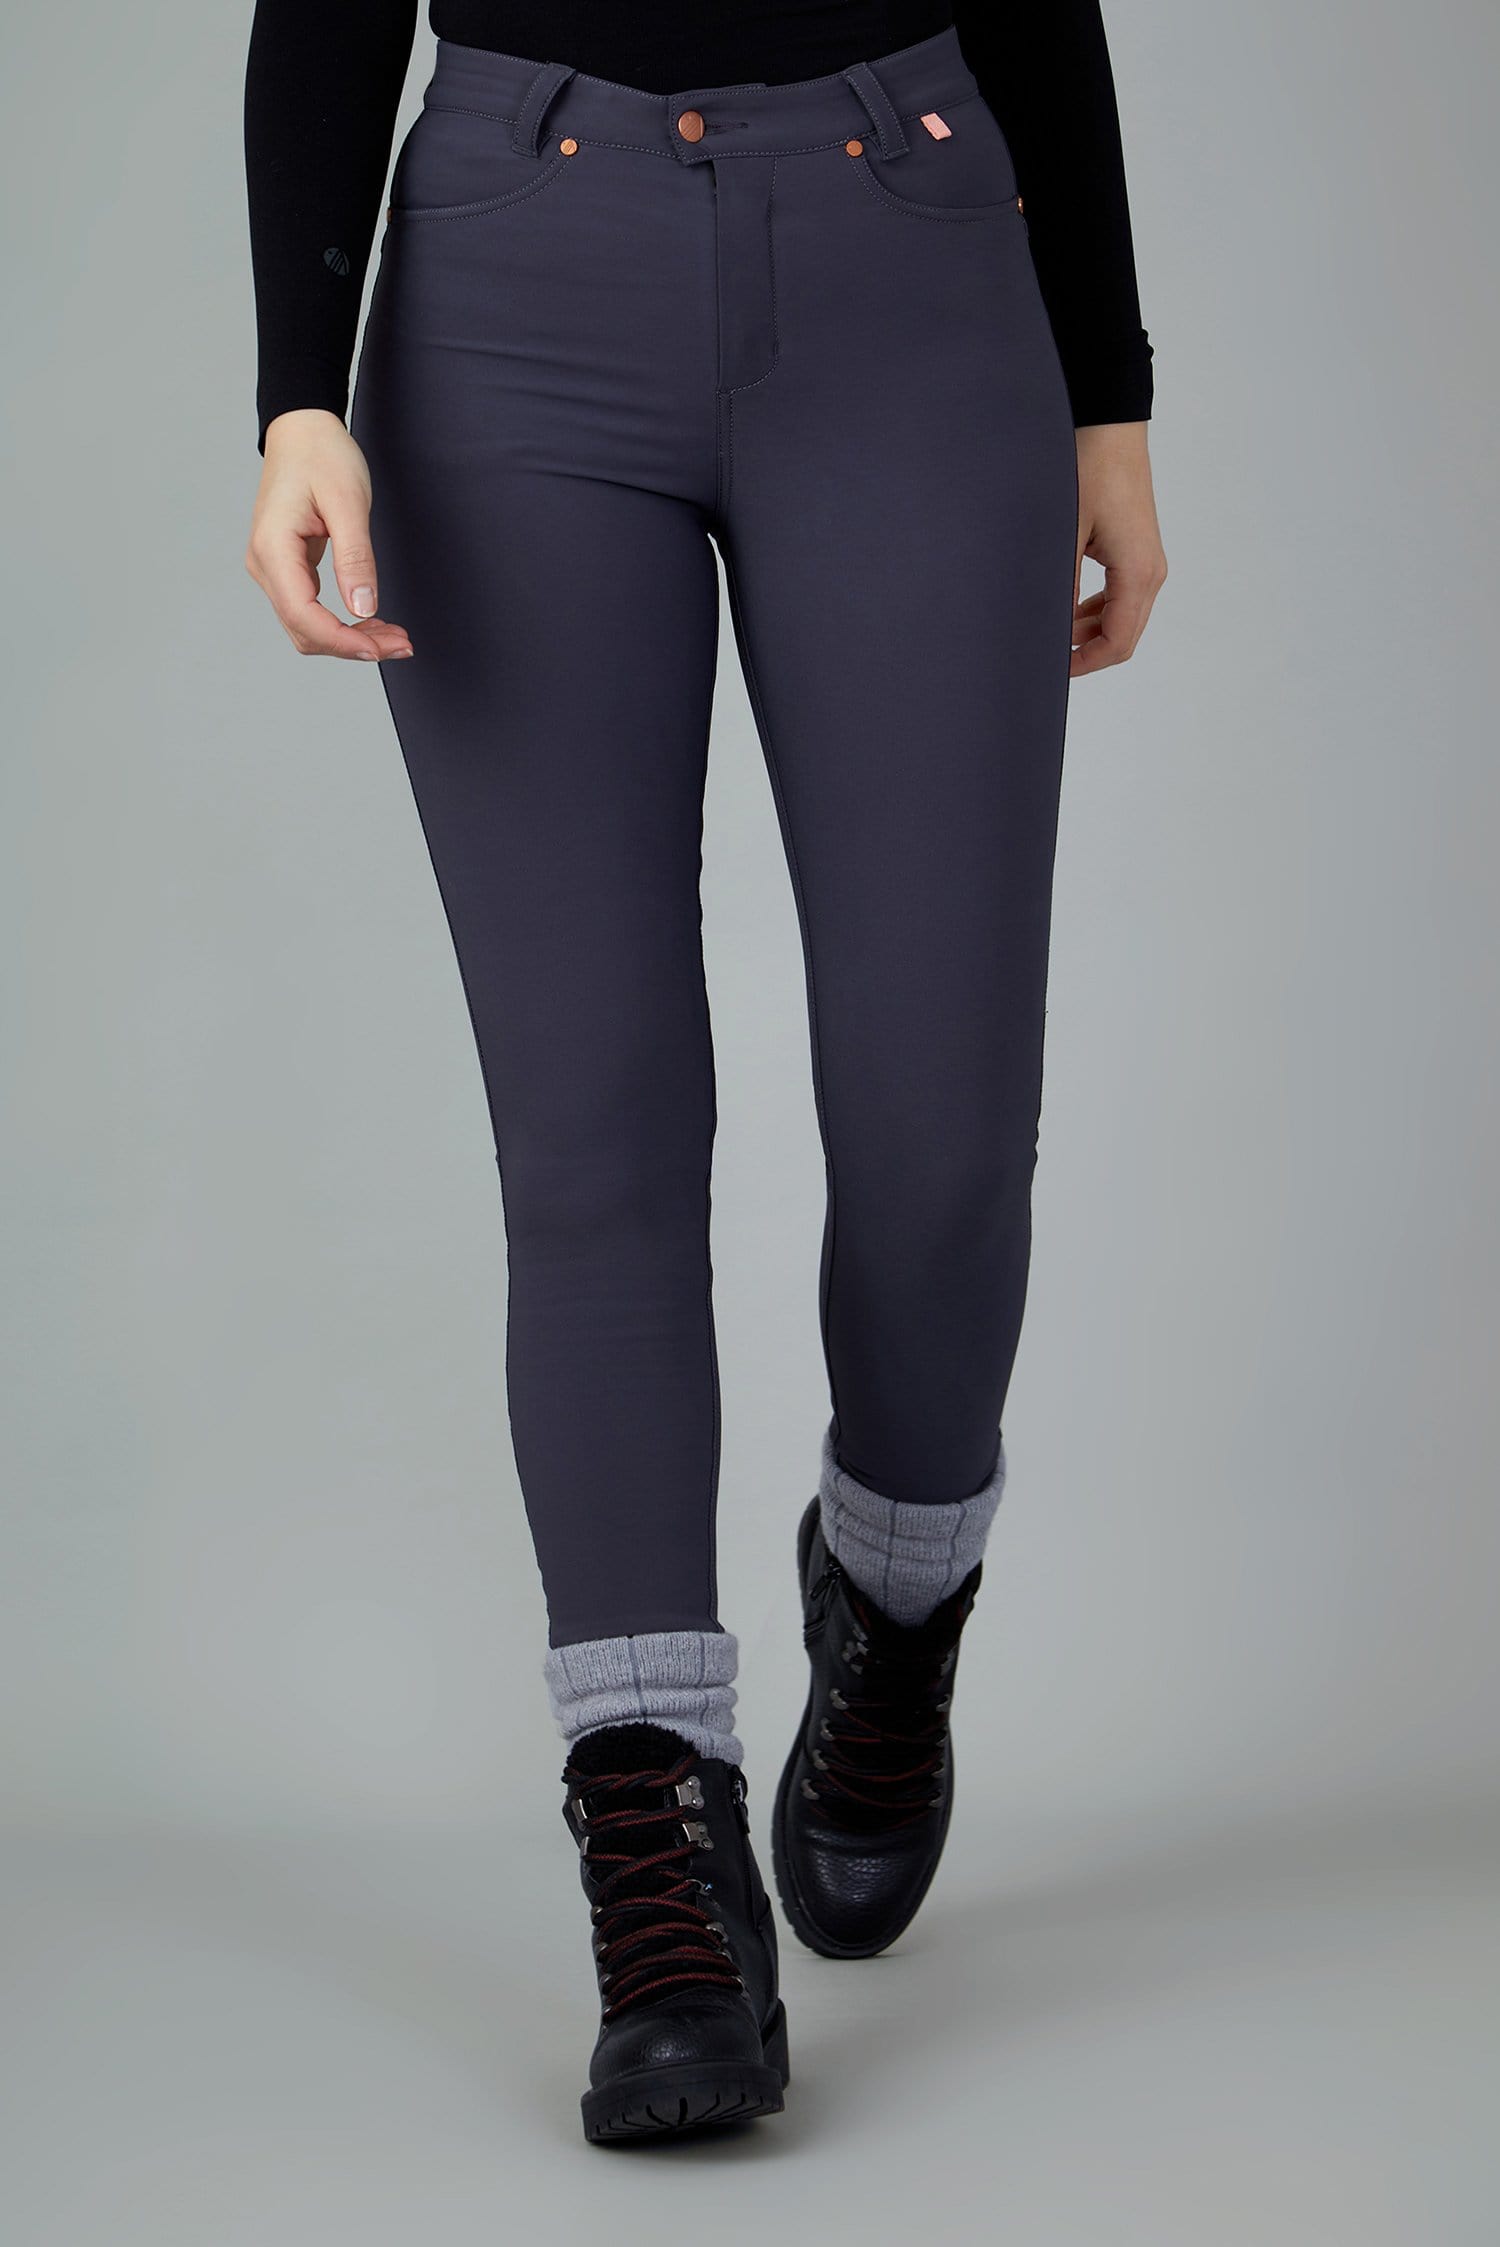 The Aventurite Stretch Skinny Outdoor Trousers - Obsidian - 32r / Uk14 - Womens - Acai Outdoorwear